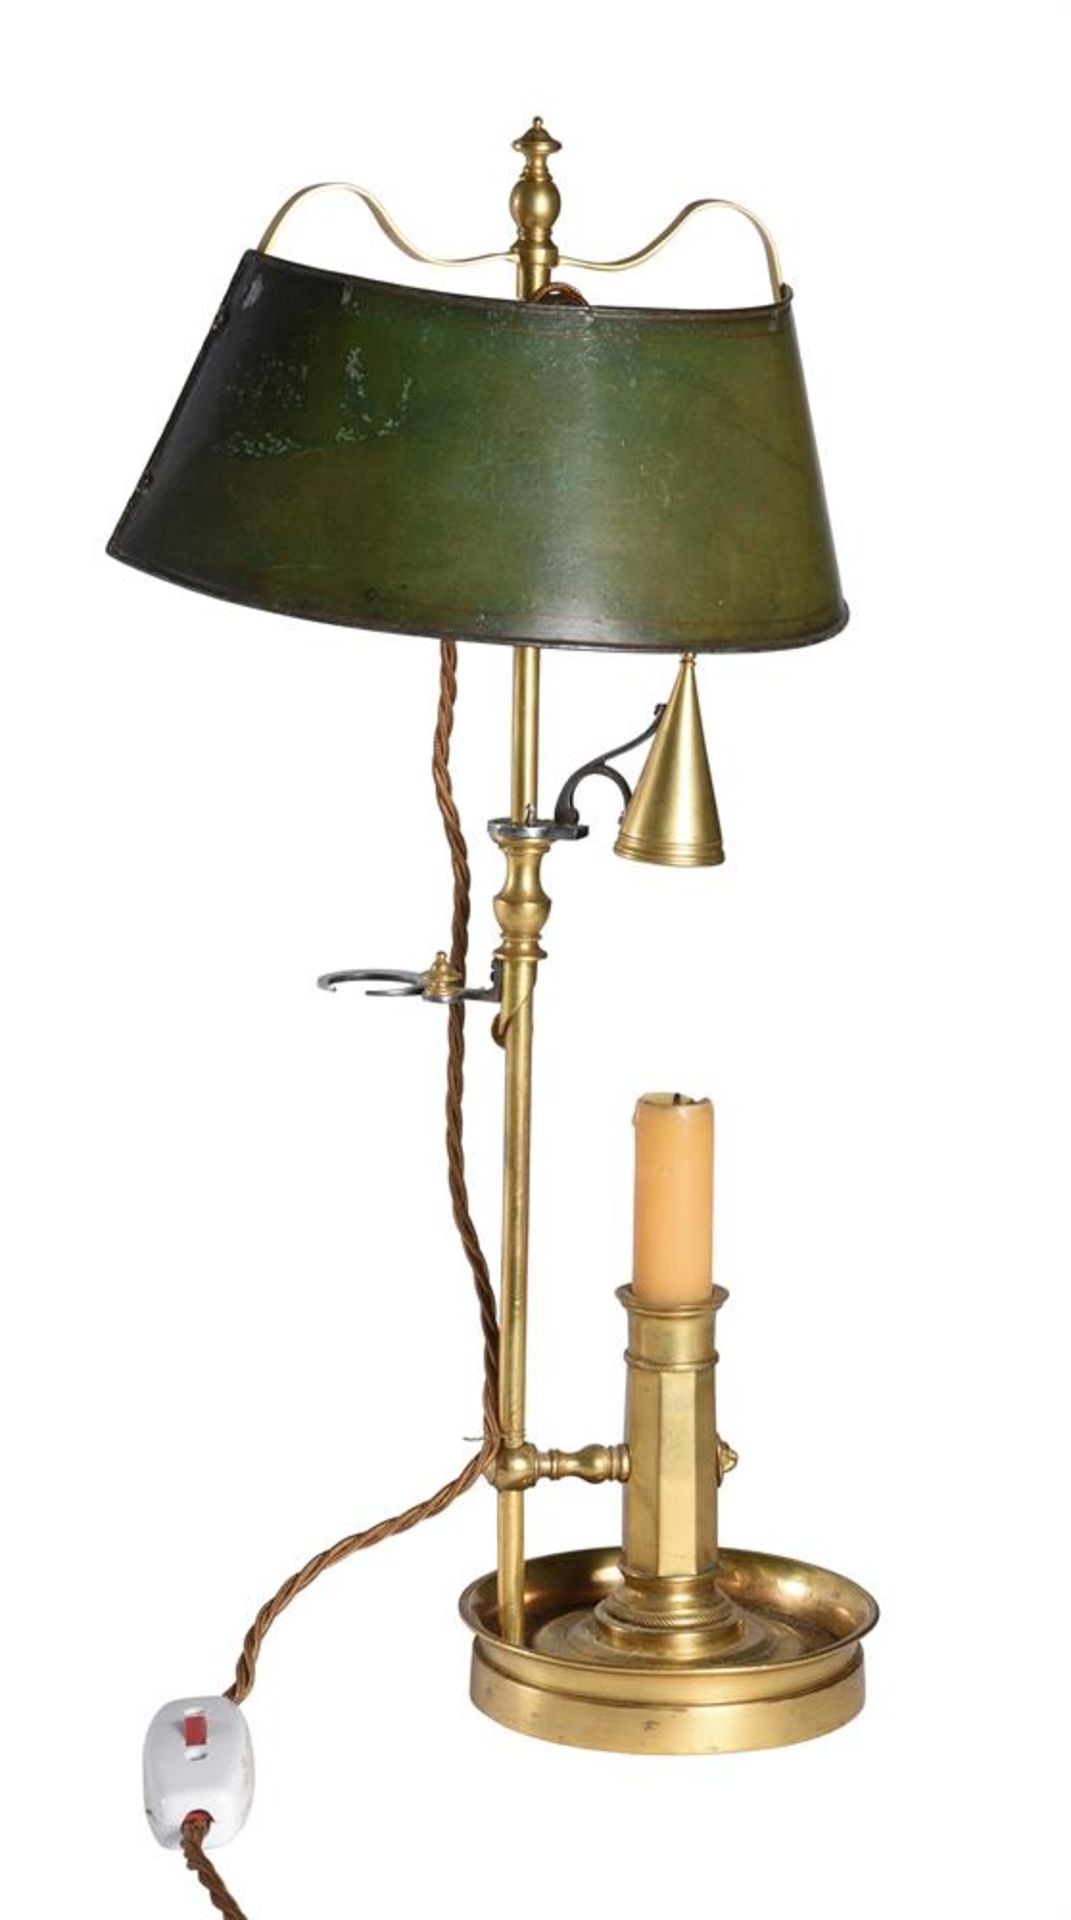 A FRENCH GILT METAL AND TOLE BOUILLOTE LAMP, 19TH CENTURY - Image 3 of 3